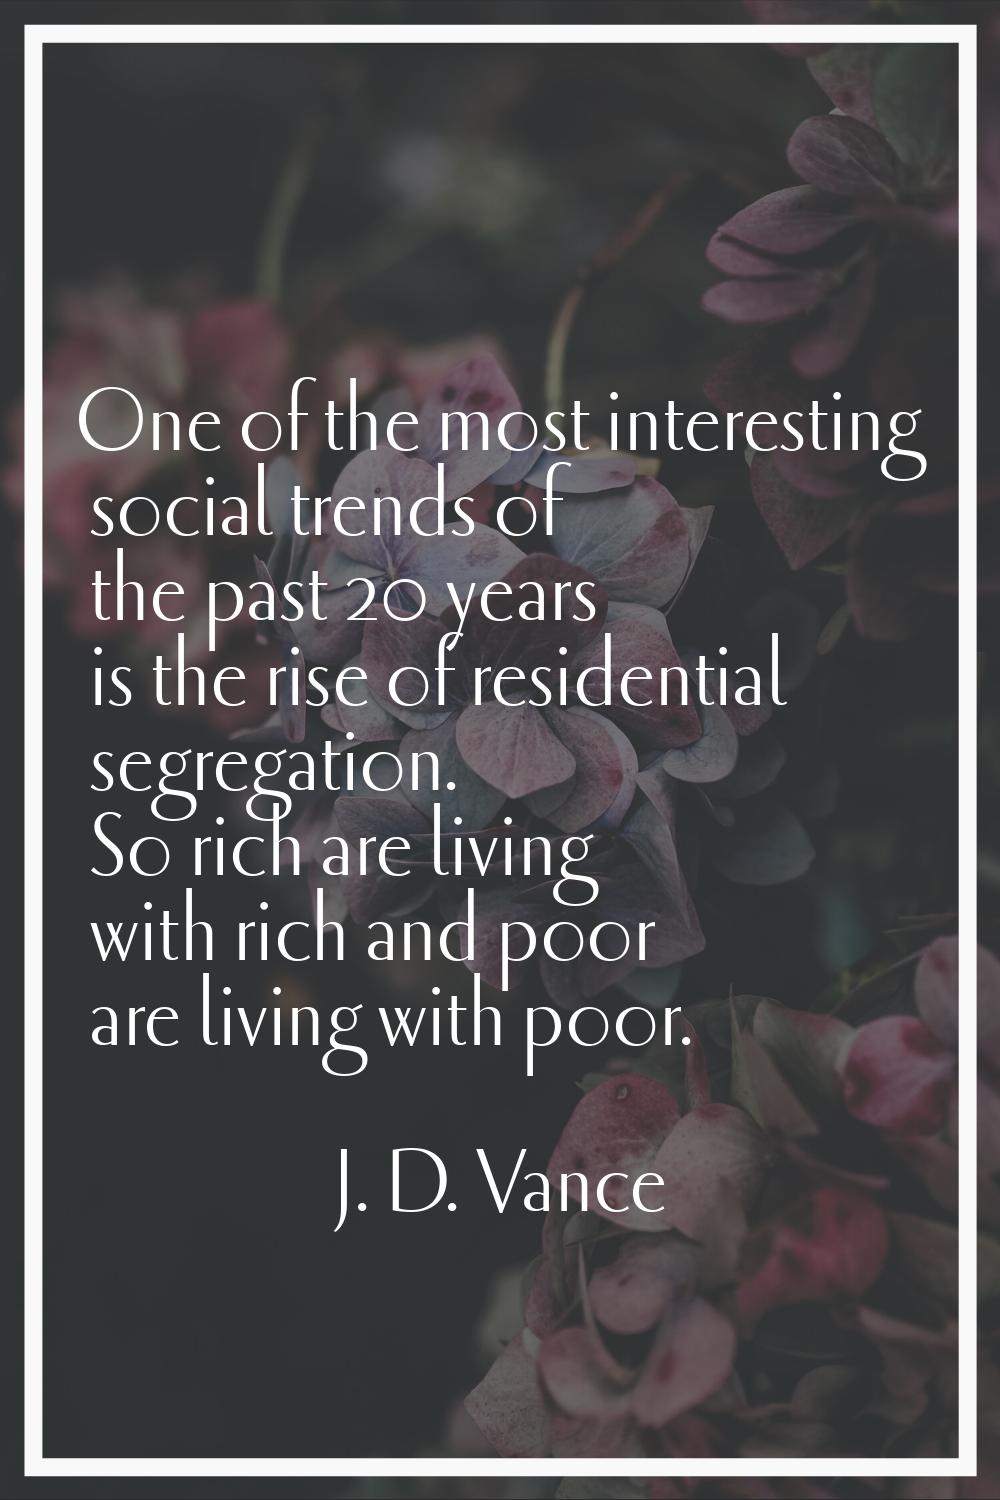 One of the most interesting social trends of the past 20 years is the rise of residential segregati